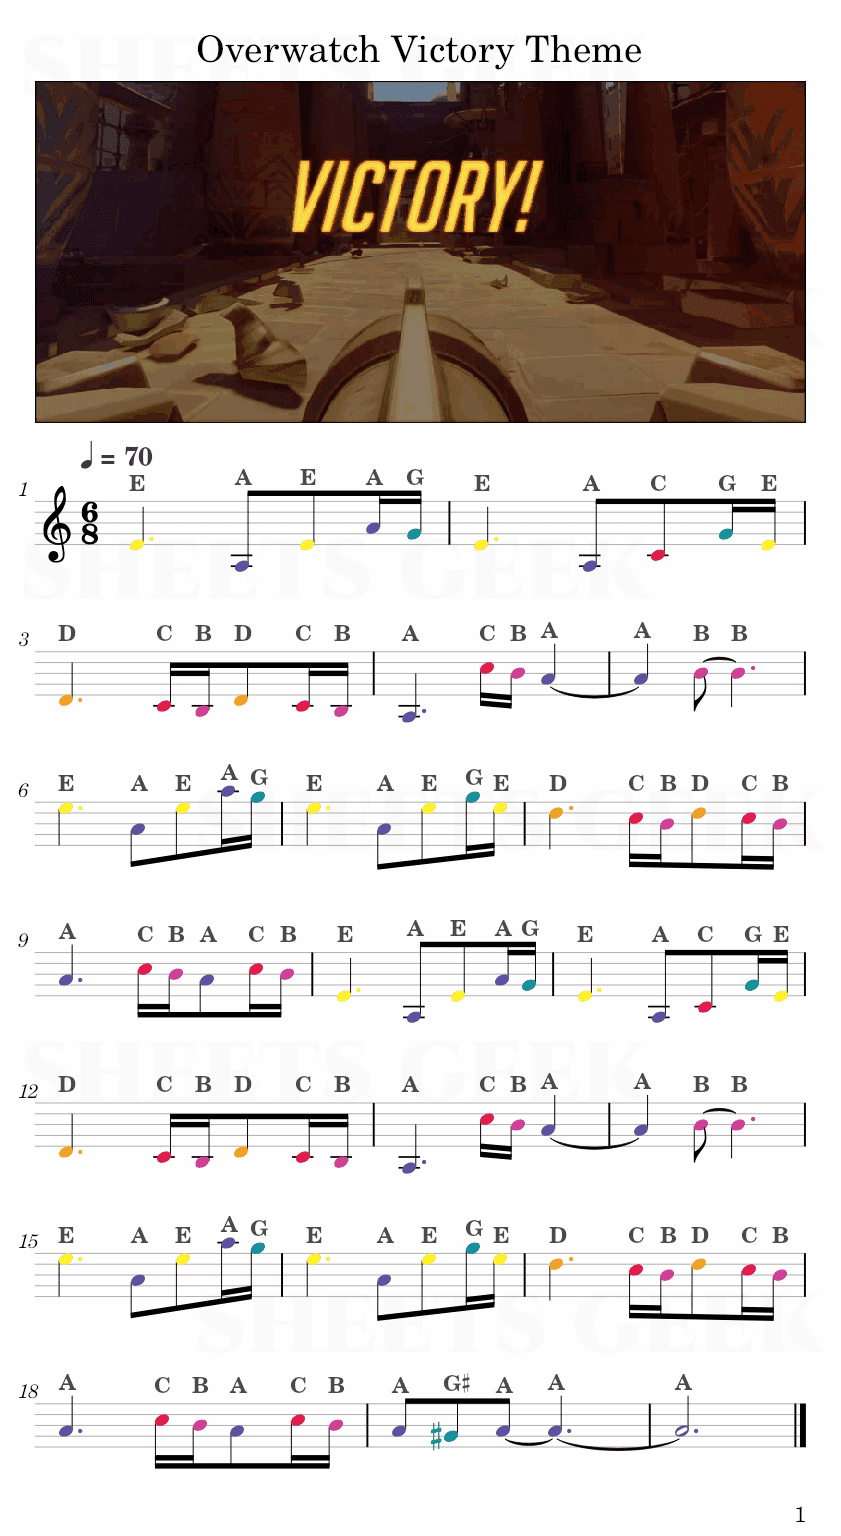 Overwatch Victory Theme Easy Sheet Music Free for piano, keyboard, flute, violin, sax, cello page 1